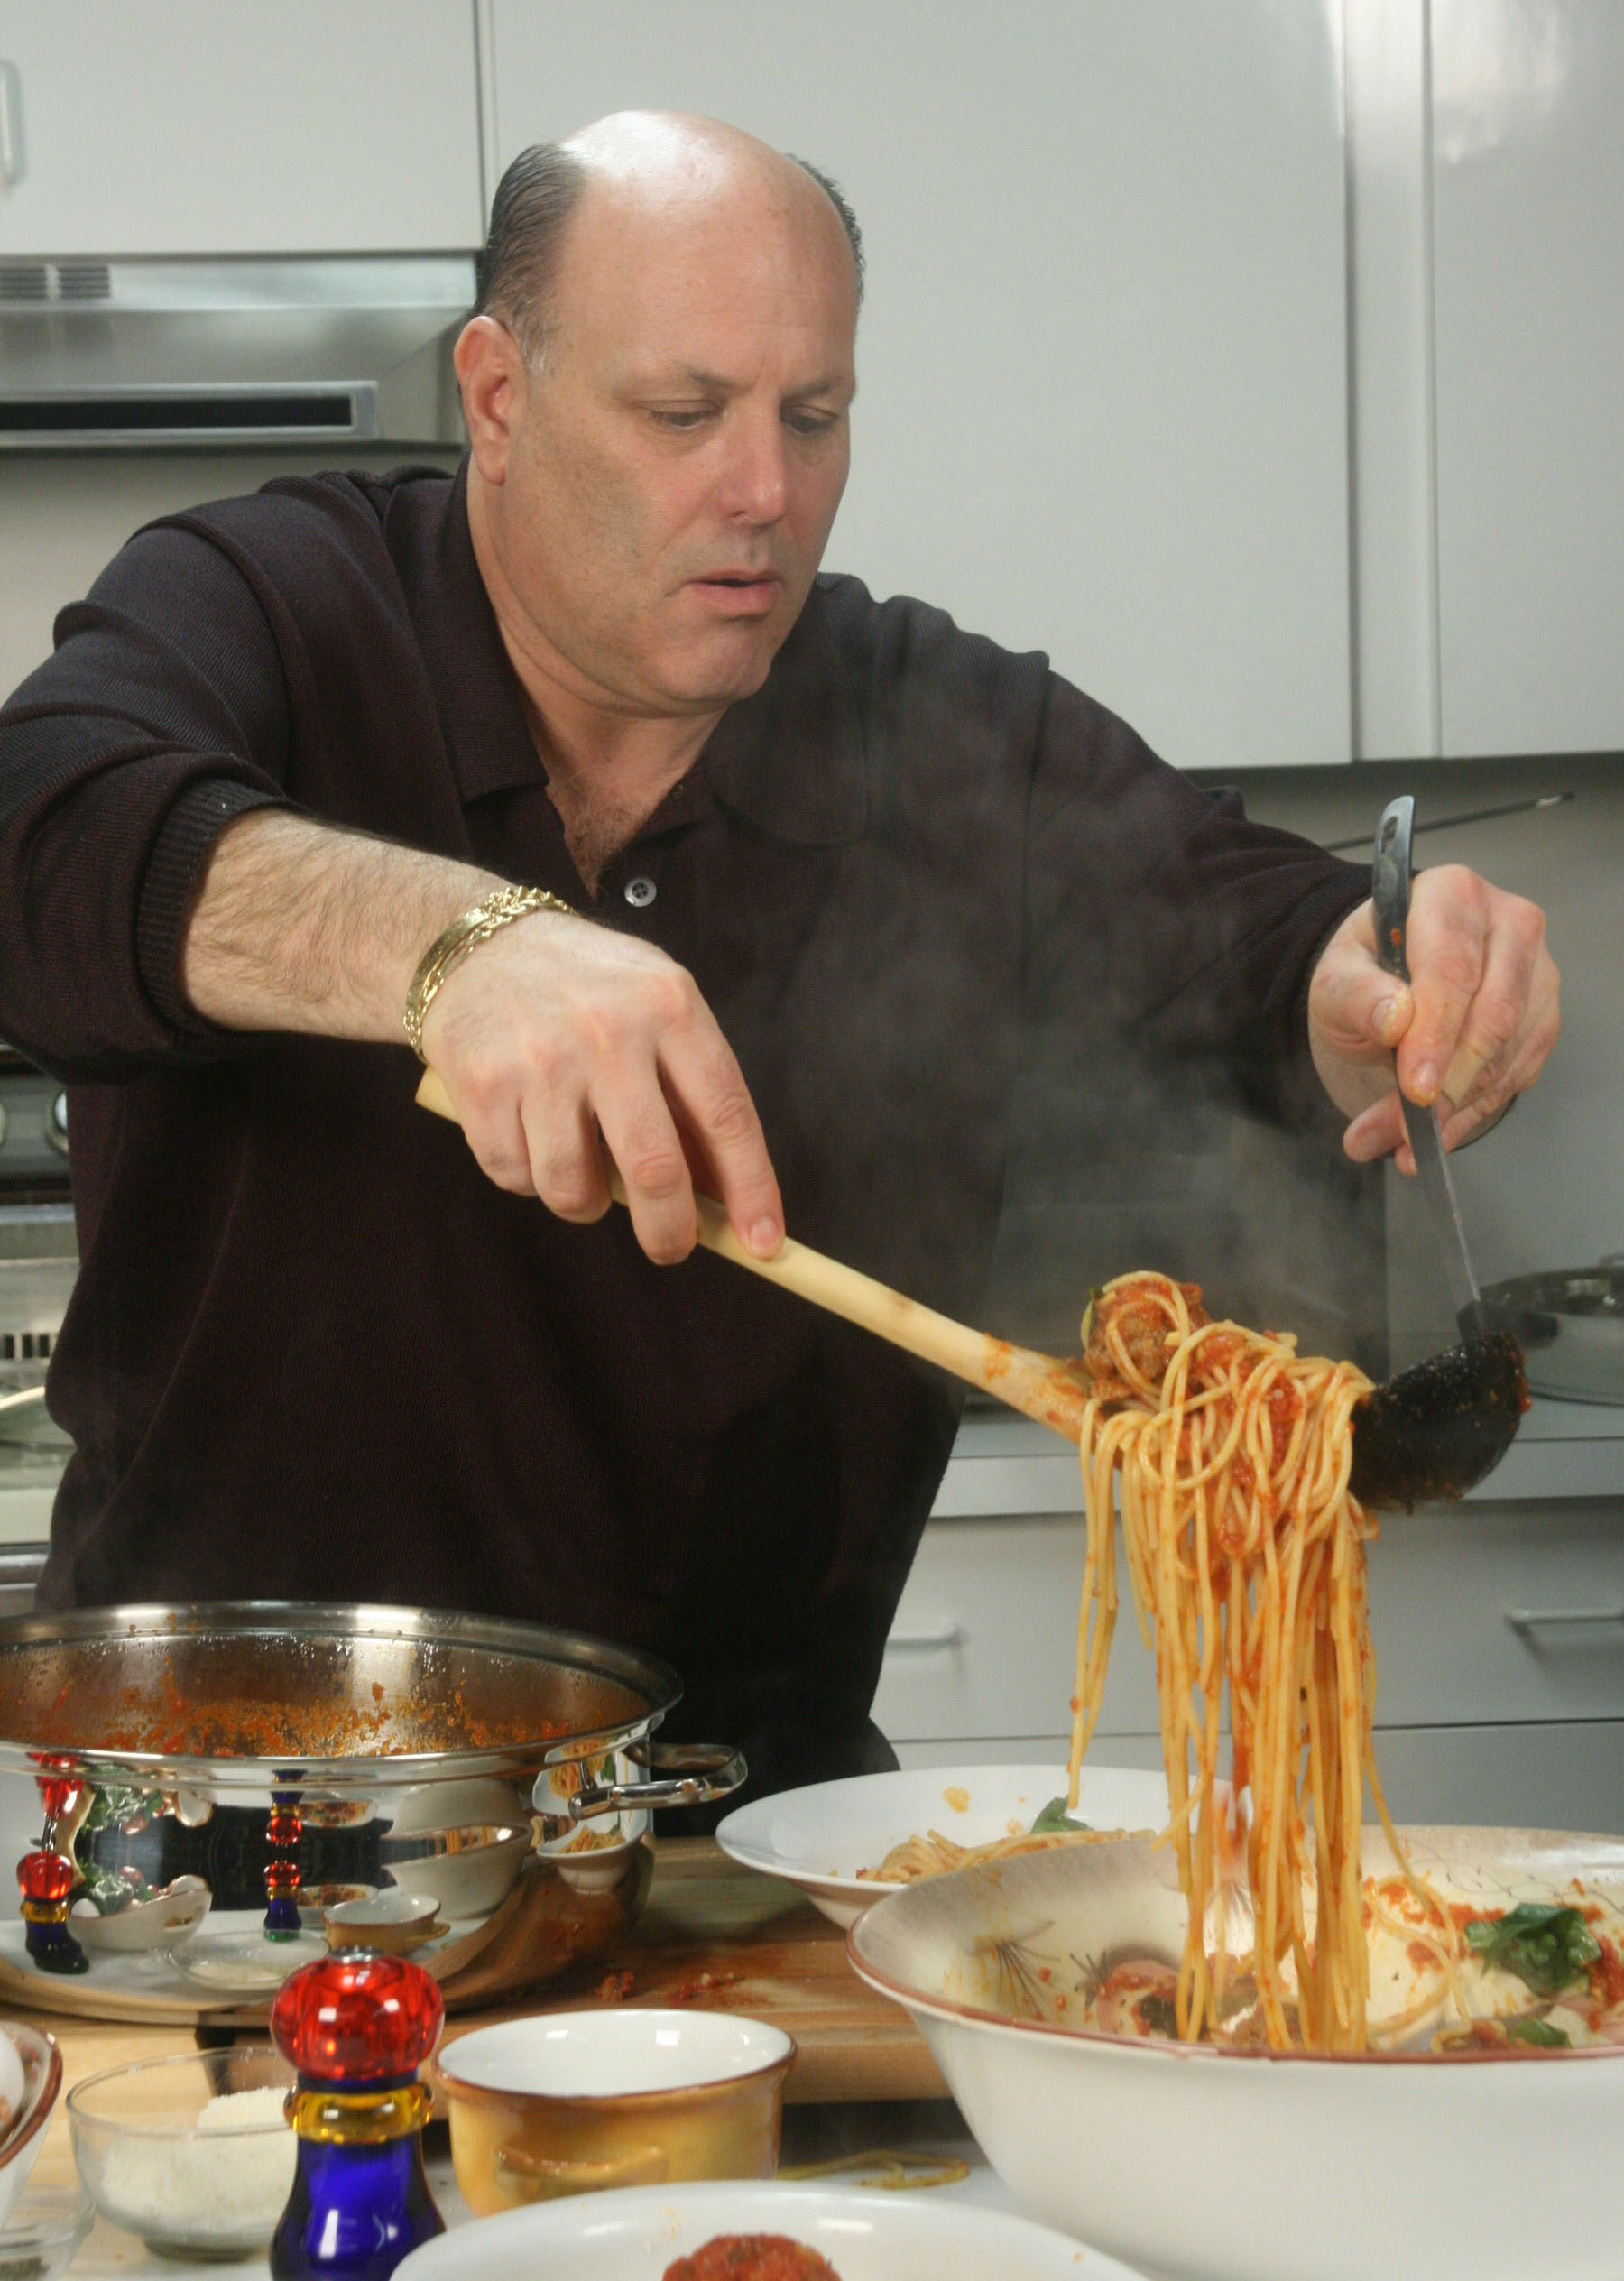 Frankie the Butcher in action cooking a Classic dish Spaghetti and Meatballs on his show Titled What's for Dinner with Frankie the Butcher on the www.italianamericannetwork.com under food and recipe's